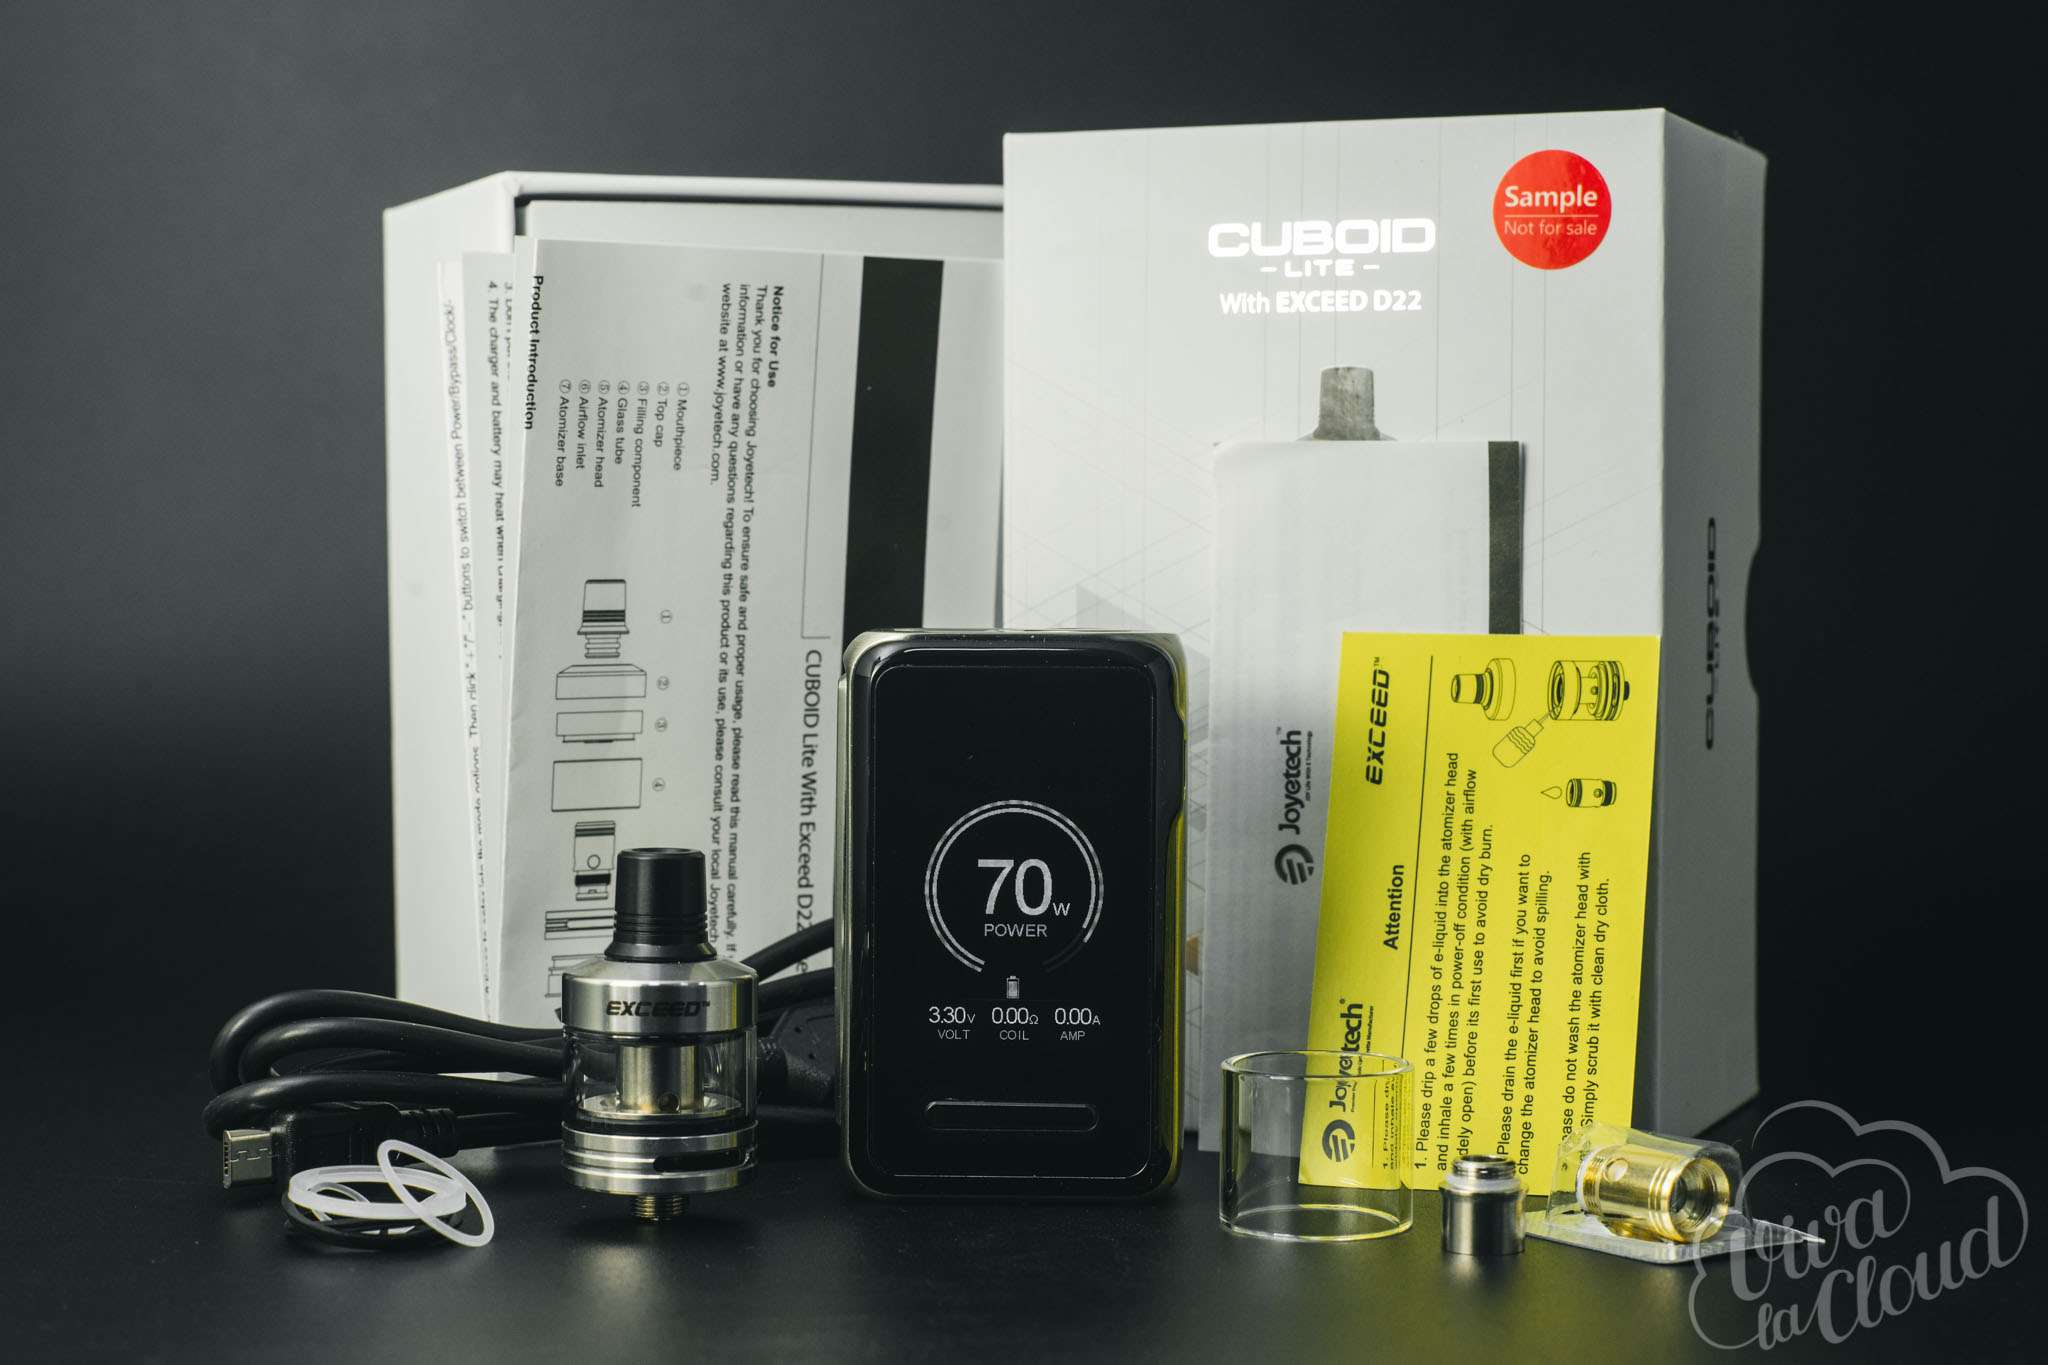 JOYTECH CUBOID LITE WITH EXCEED D22